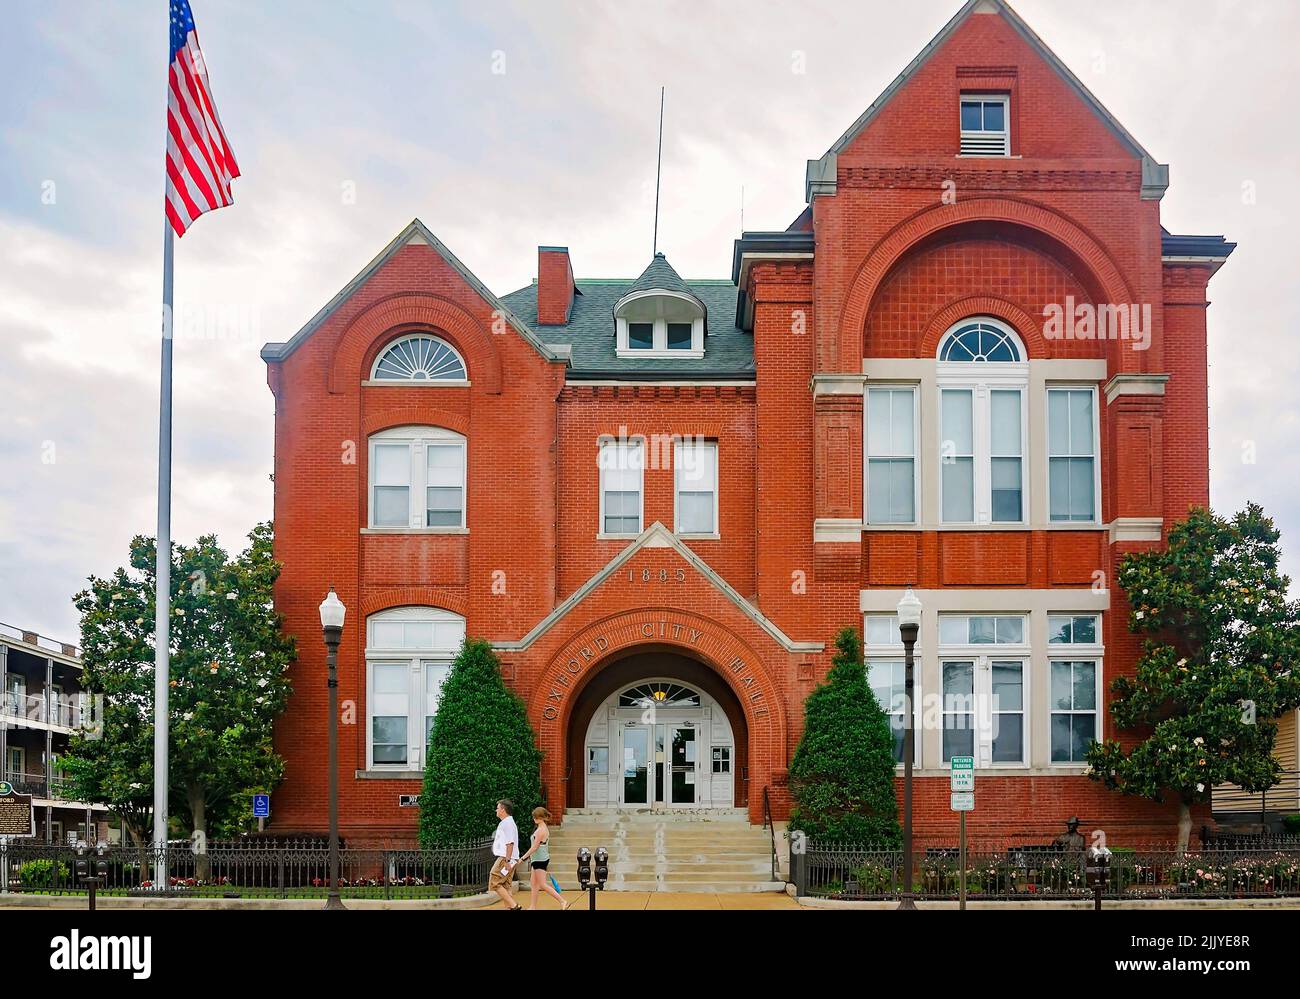 People walk in front of Oxford City Hall, May 31, 2015, in Oxford, Mississippi. Oxford City Hall was built in 1885 in the Romanesque Revival style. Stock Photo